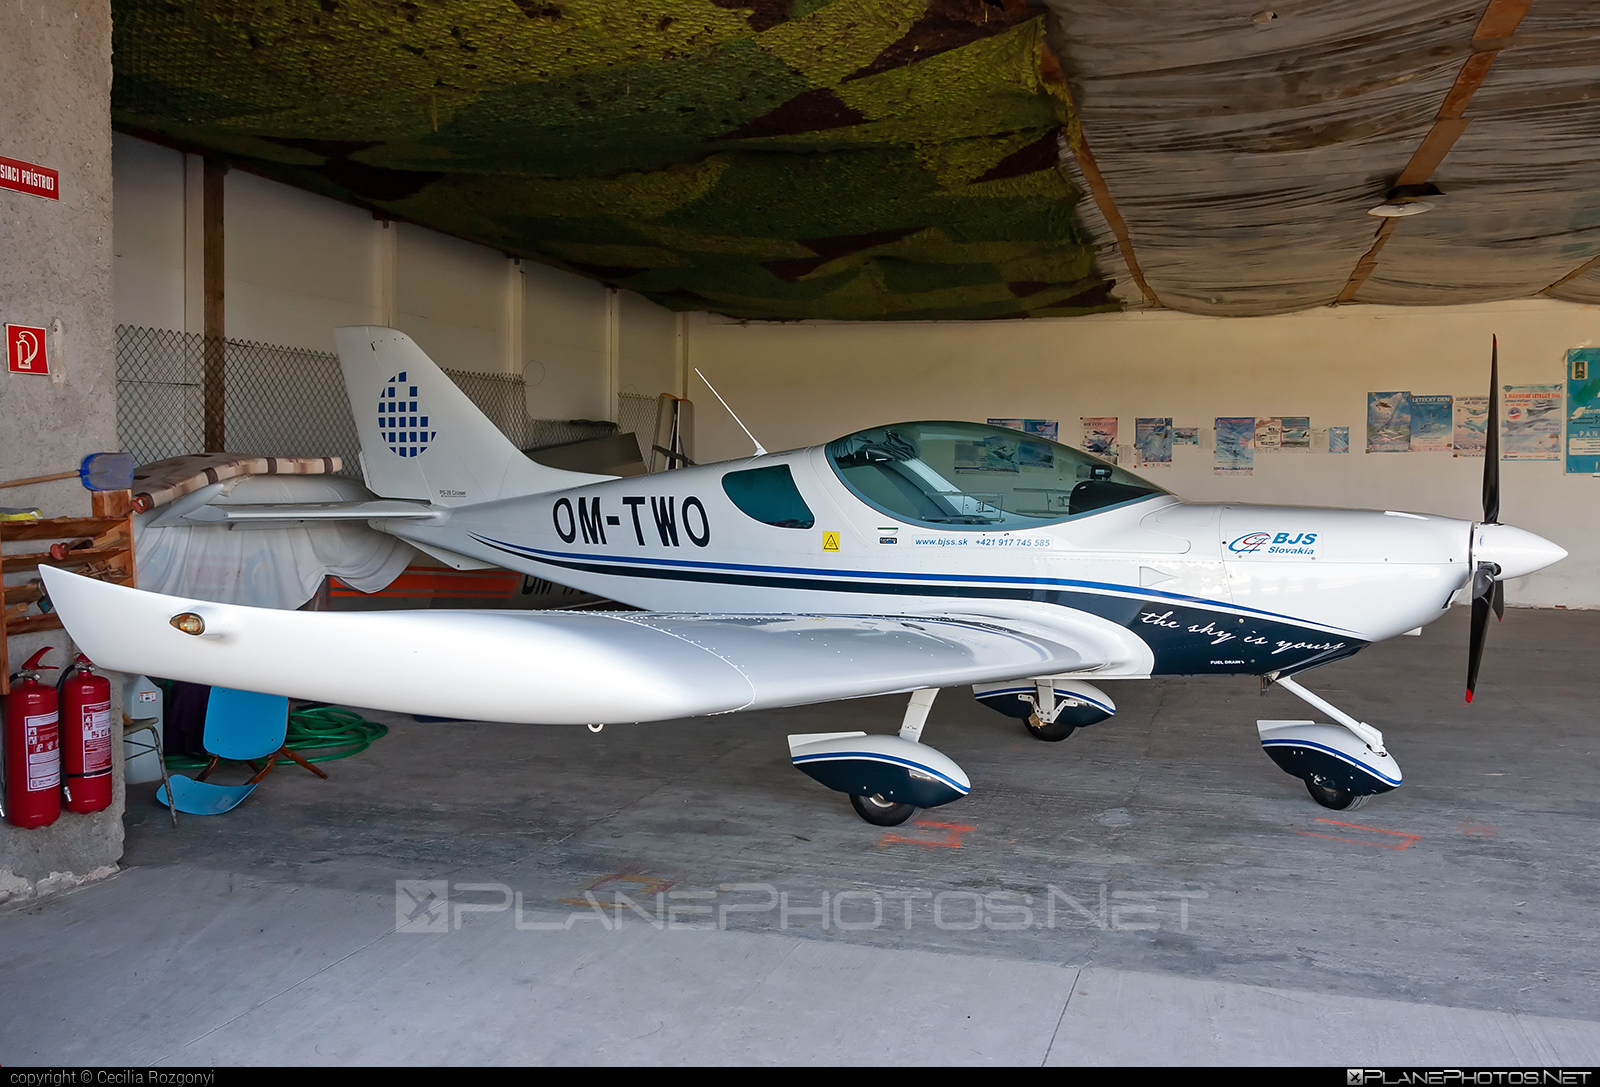 Czech Sport Aircraft PS-28 Cruiser - OM-TWO operated by Flying Service s.r.o. #czechsportaircraft #flyingservicesro #ps28 #ps28cruiser